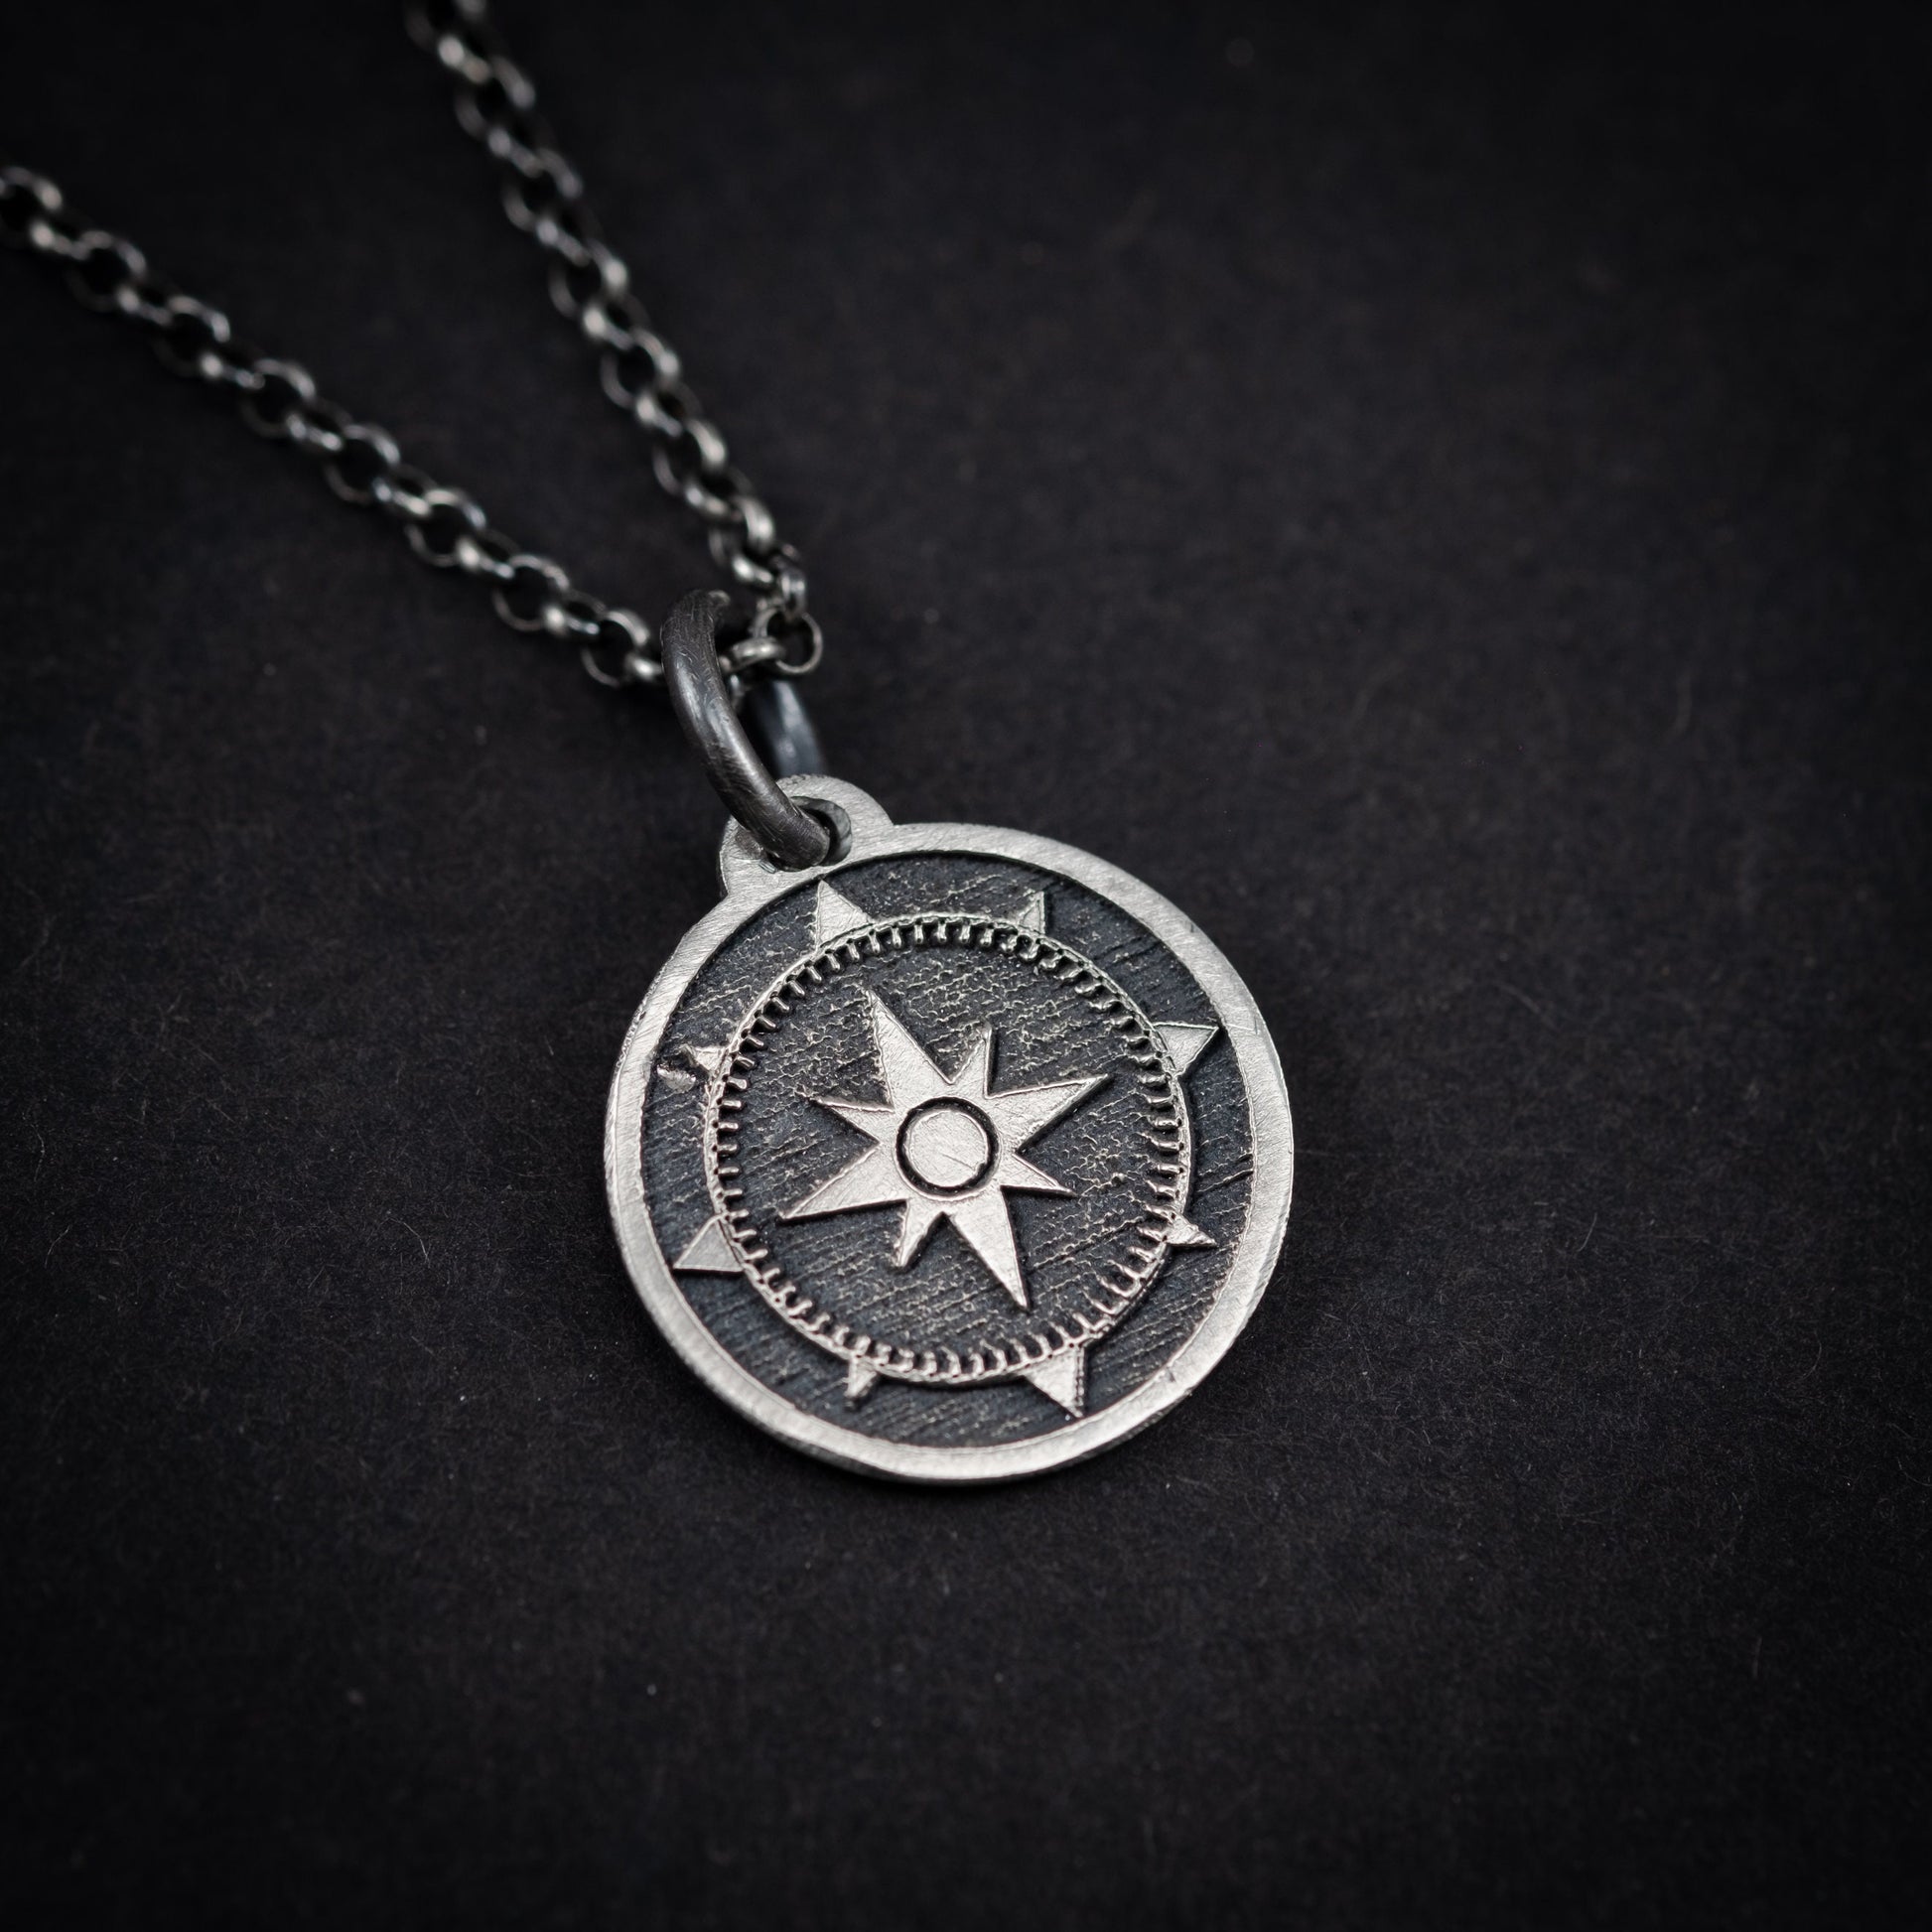 Silver Personalized Compass mens pendant necklace, Engraved Silver handmade jewelry, Unique ravel gift, Christmas gifts